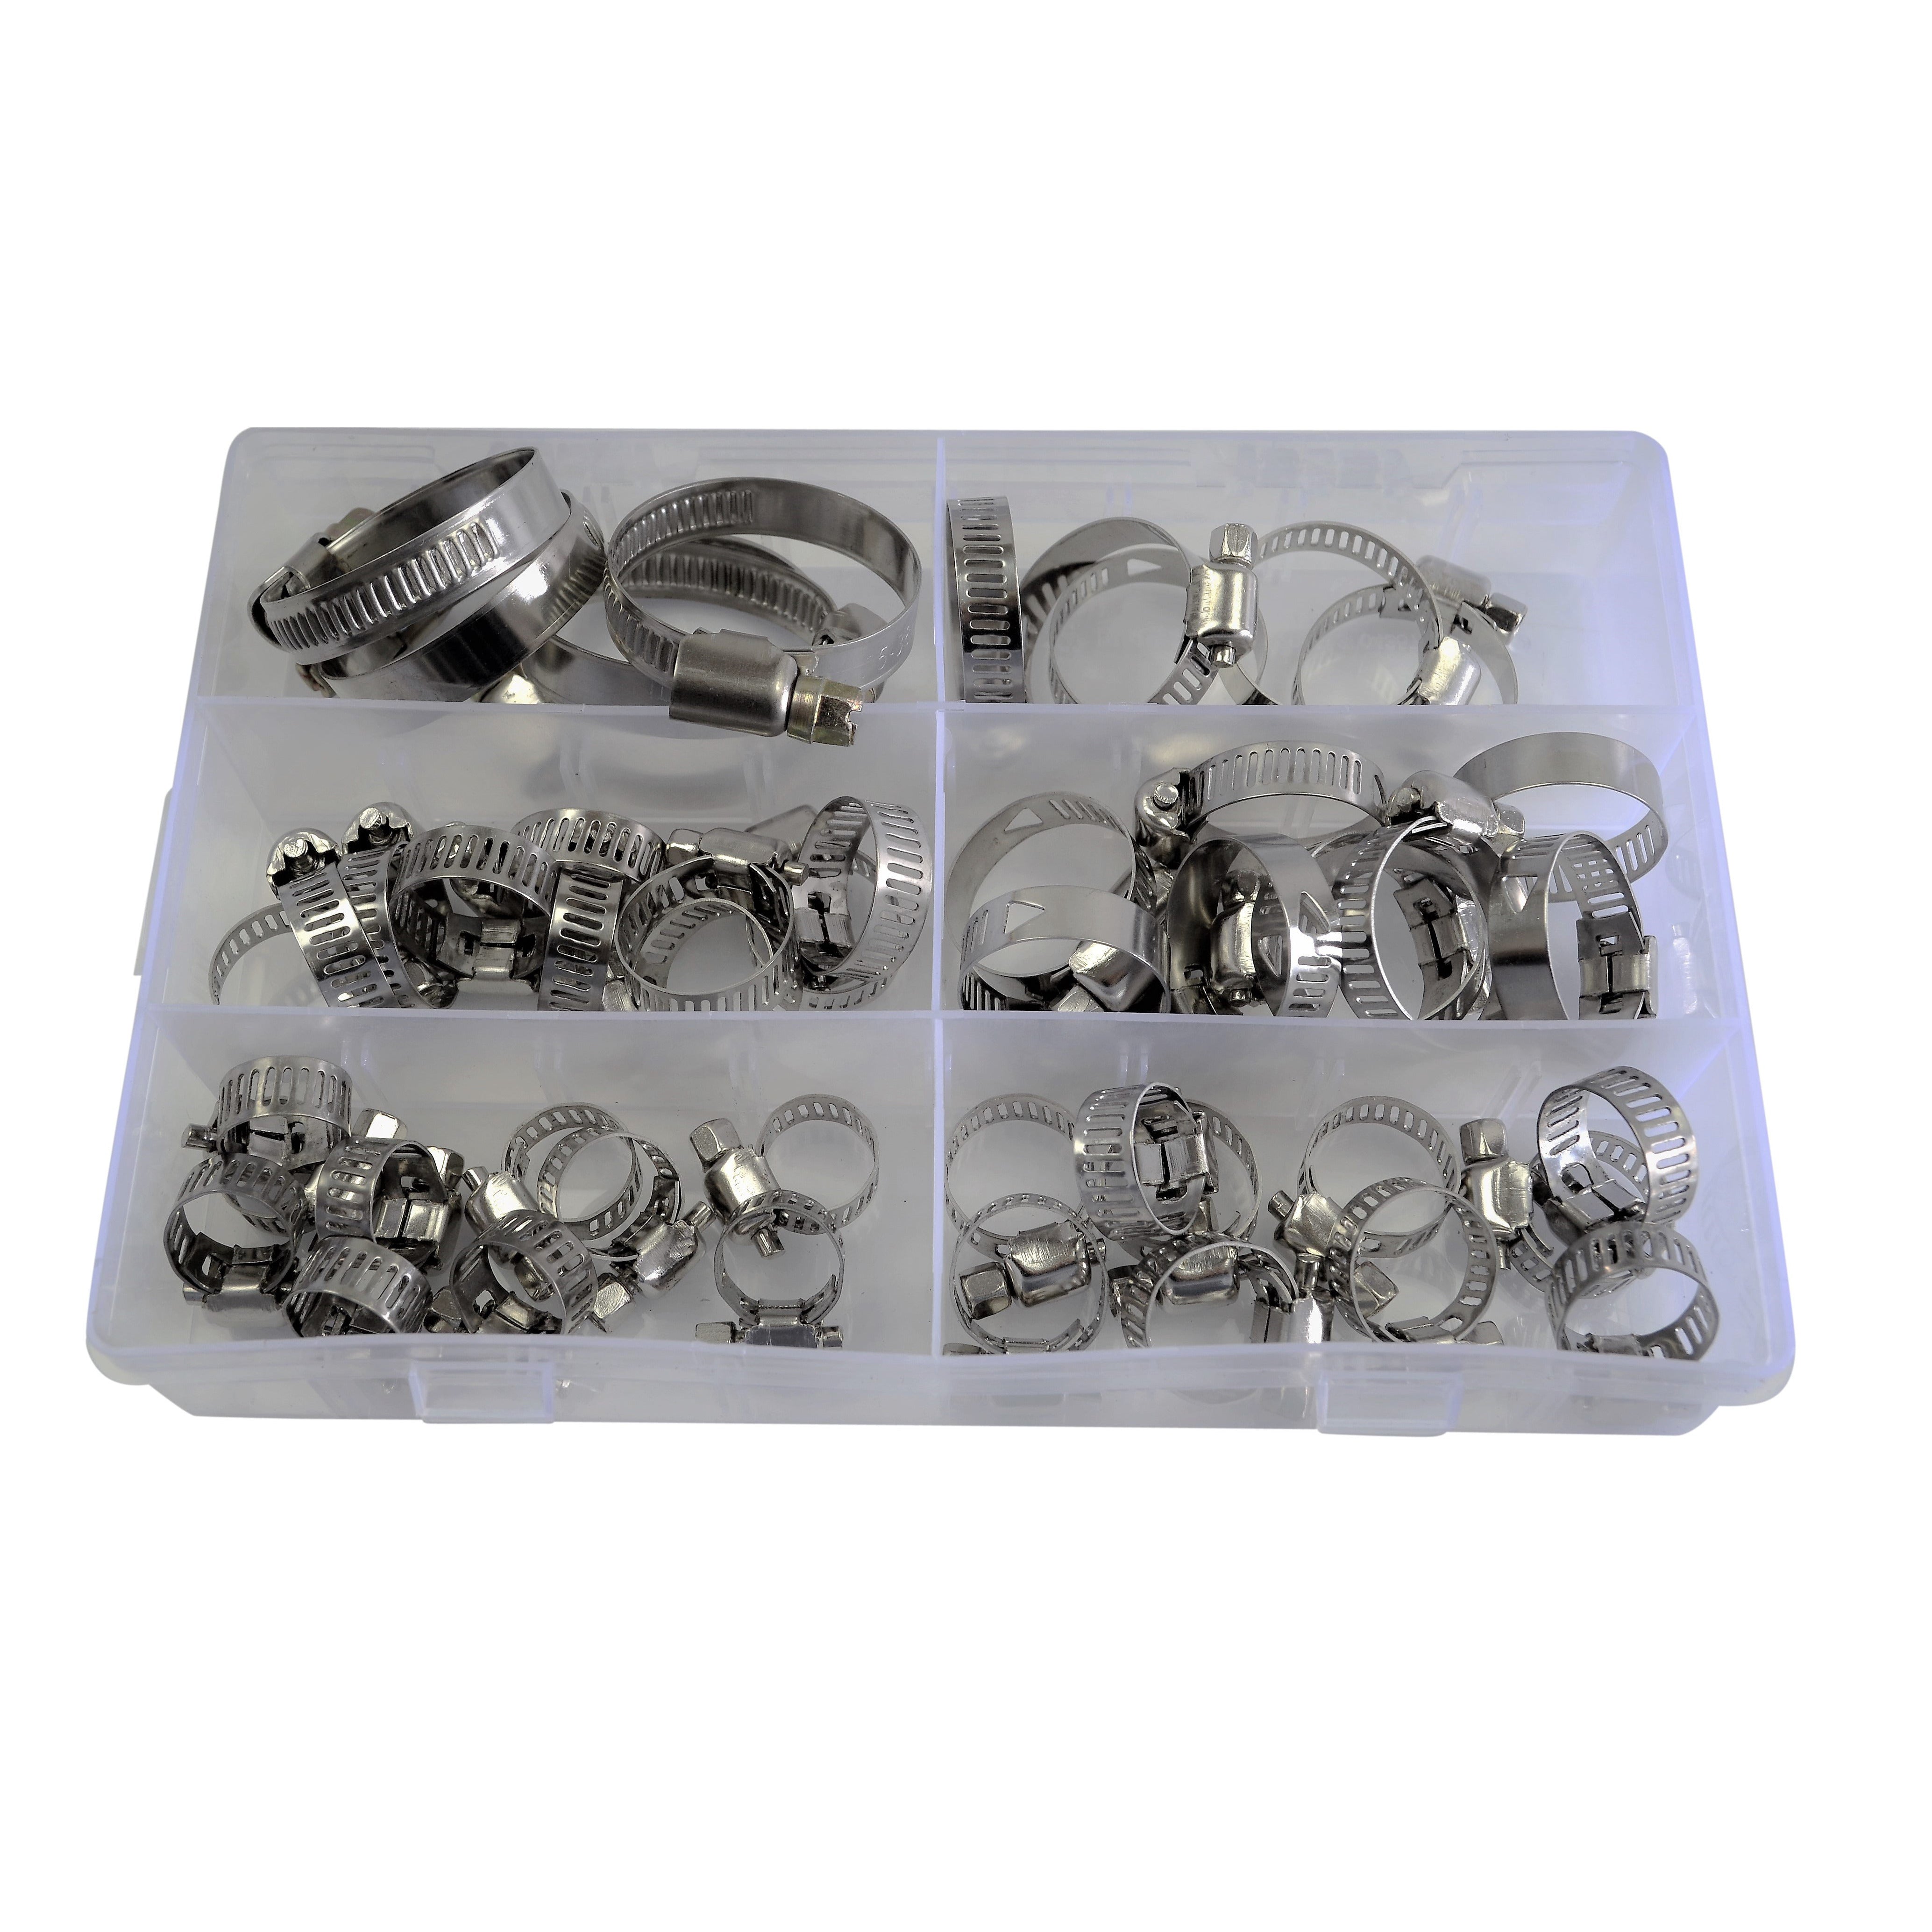 stainless steal adjustable range worm gear hose clamp kit 6 sizes set includes 50pcs 8-38mm cooling parts accessories hex head screw easy use